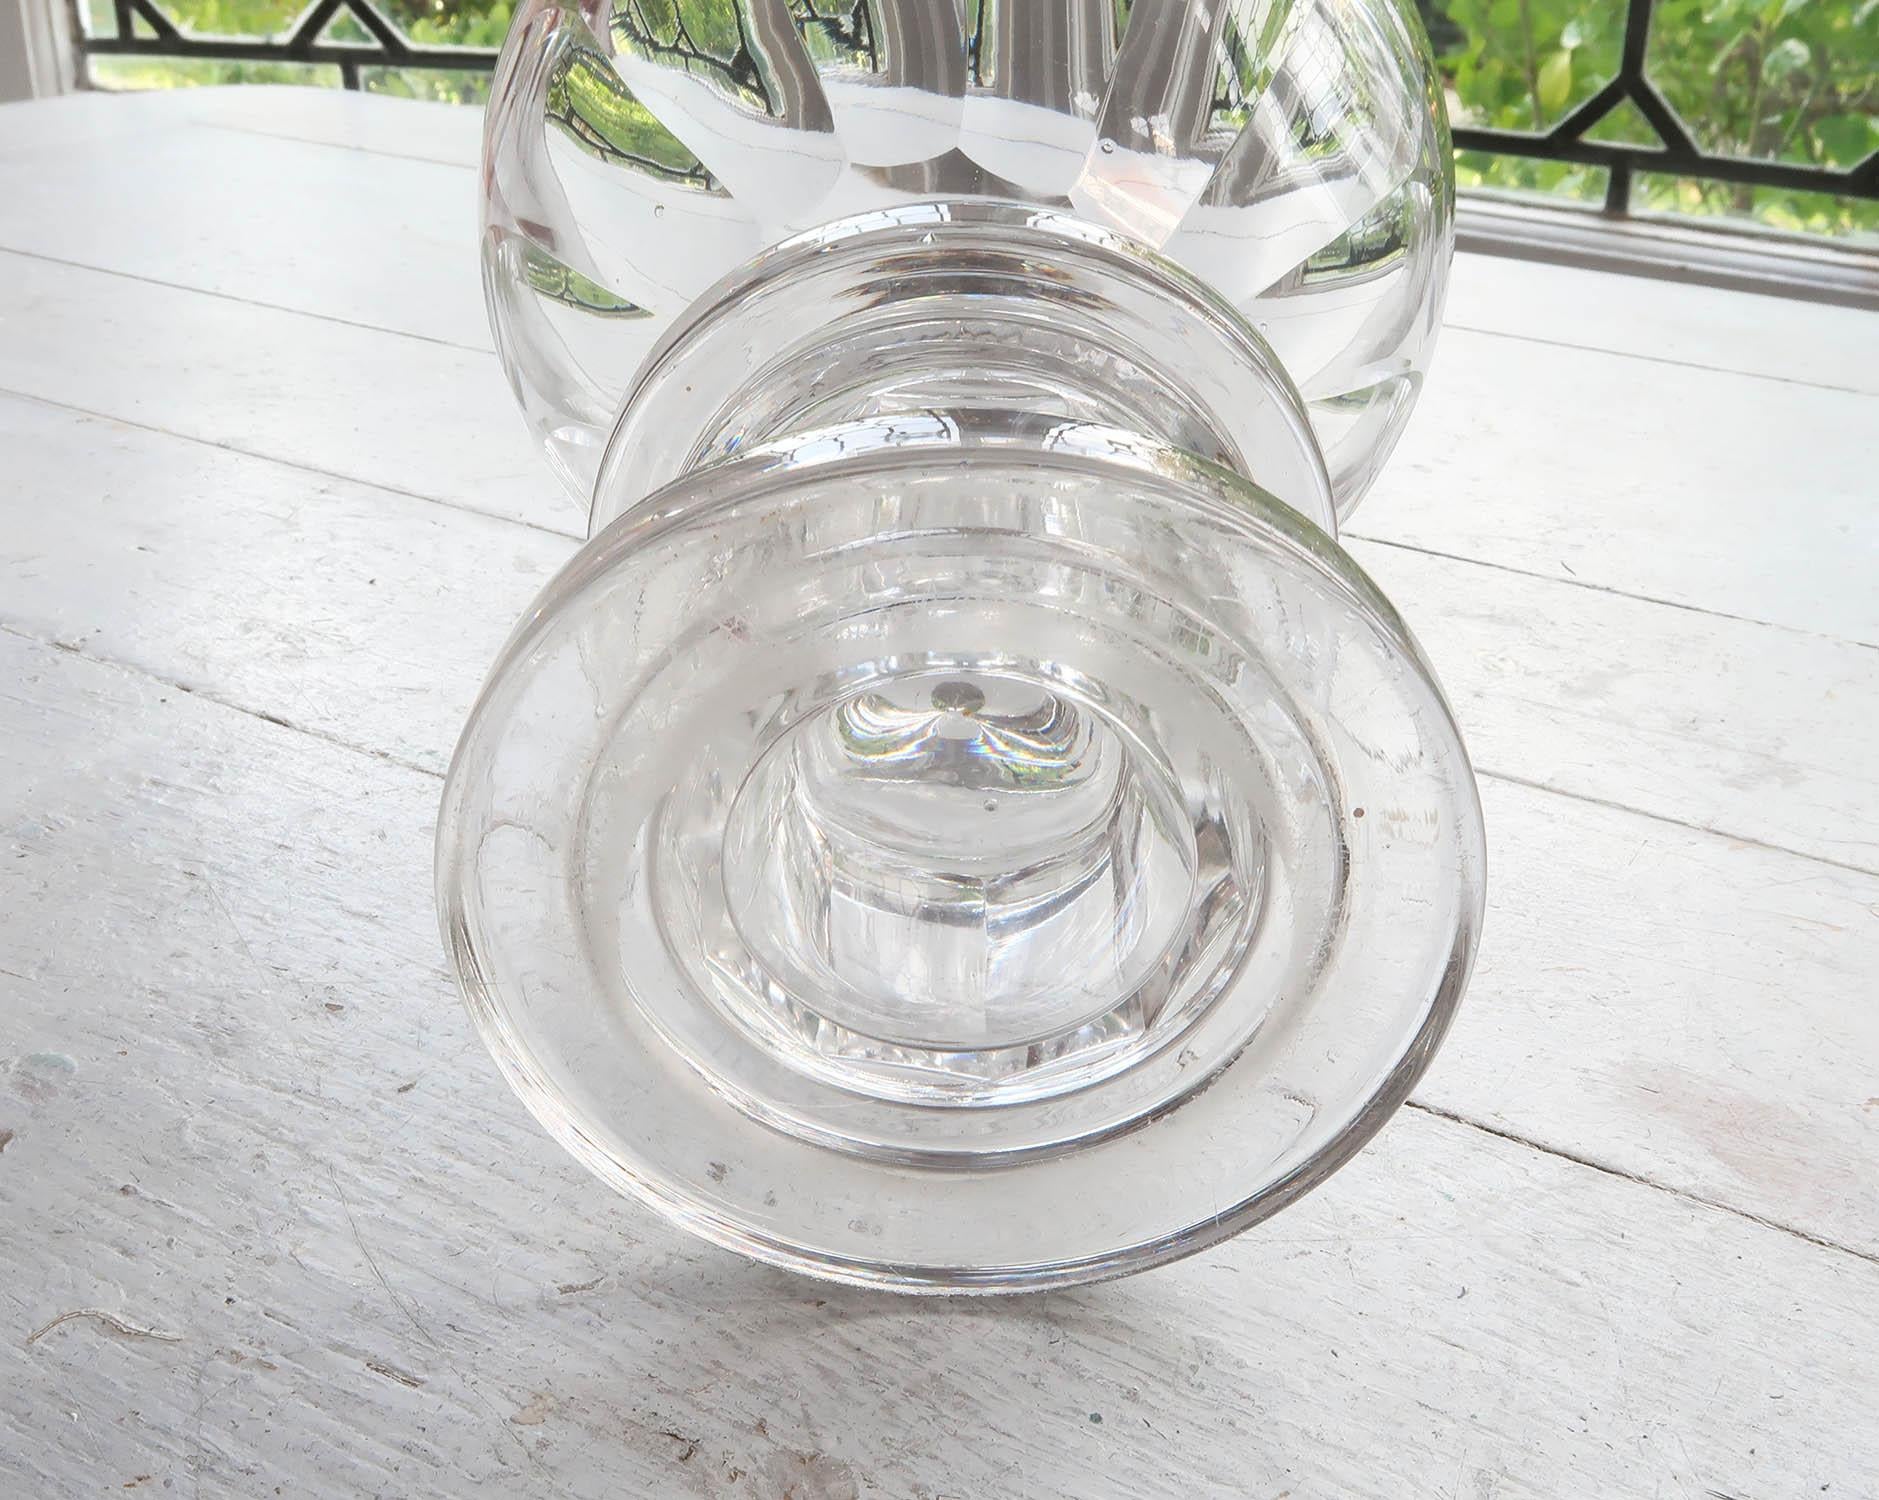  Large Antique Georgian Style Glass Pedestal Bowl, English, 19th Century For Sale 1